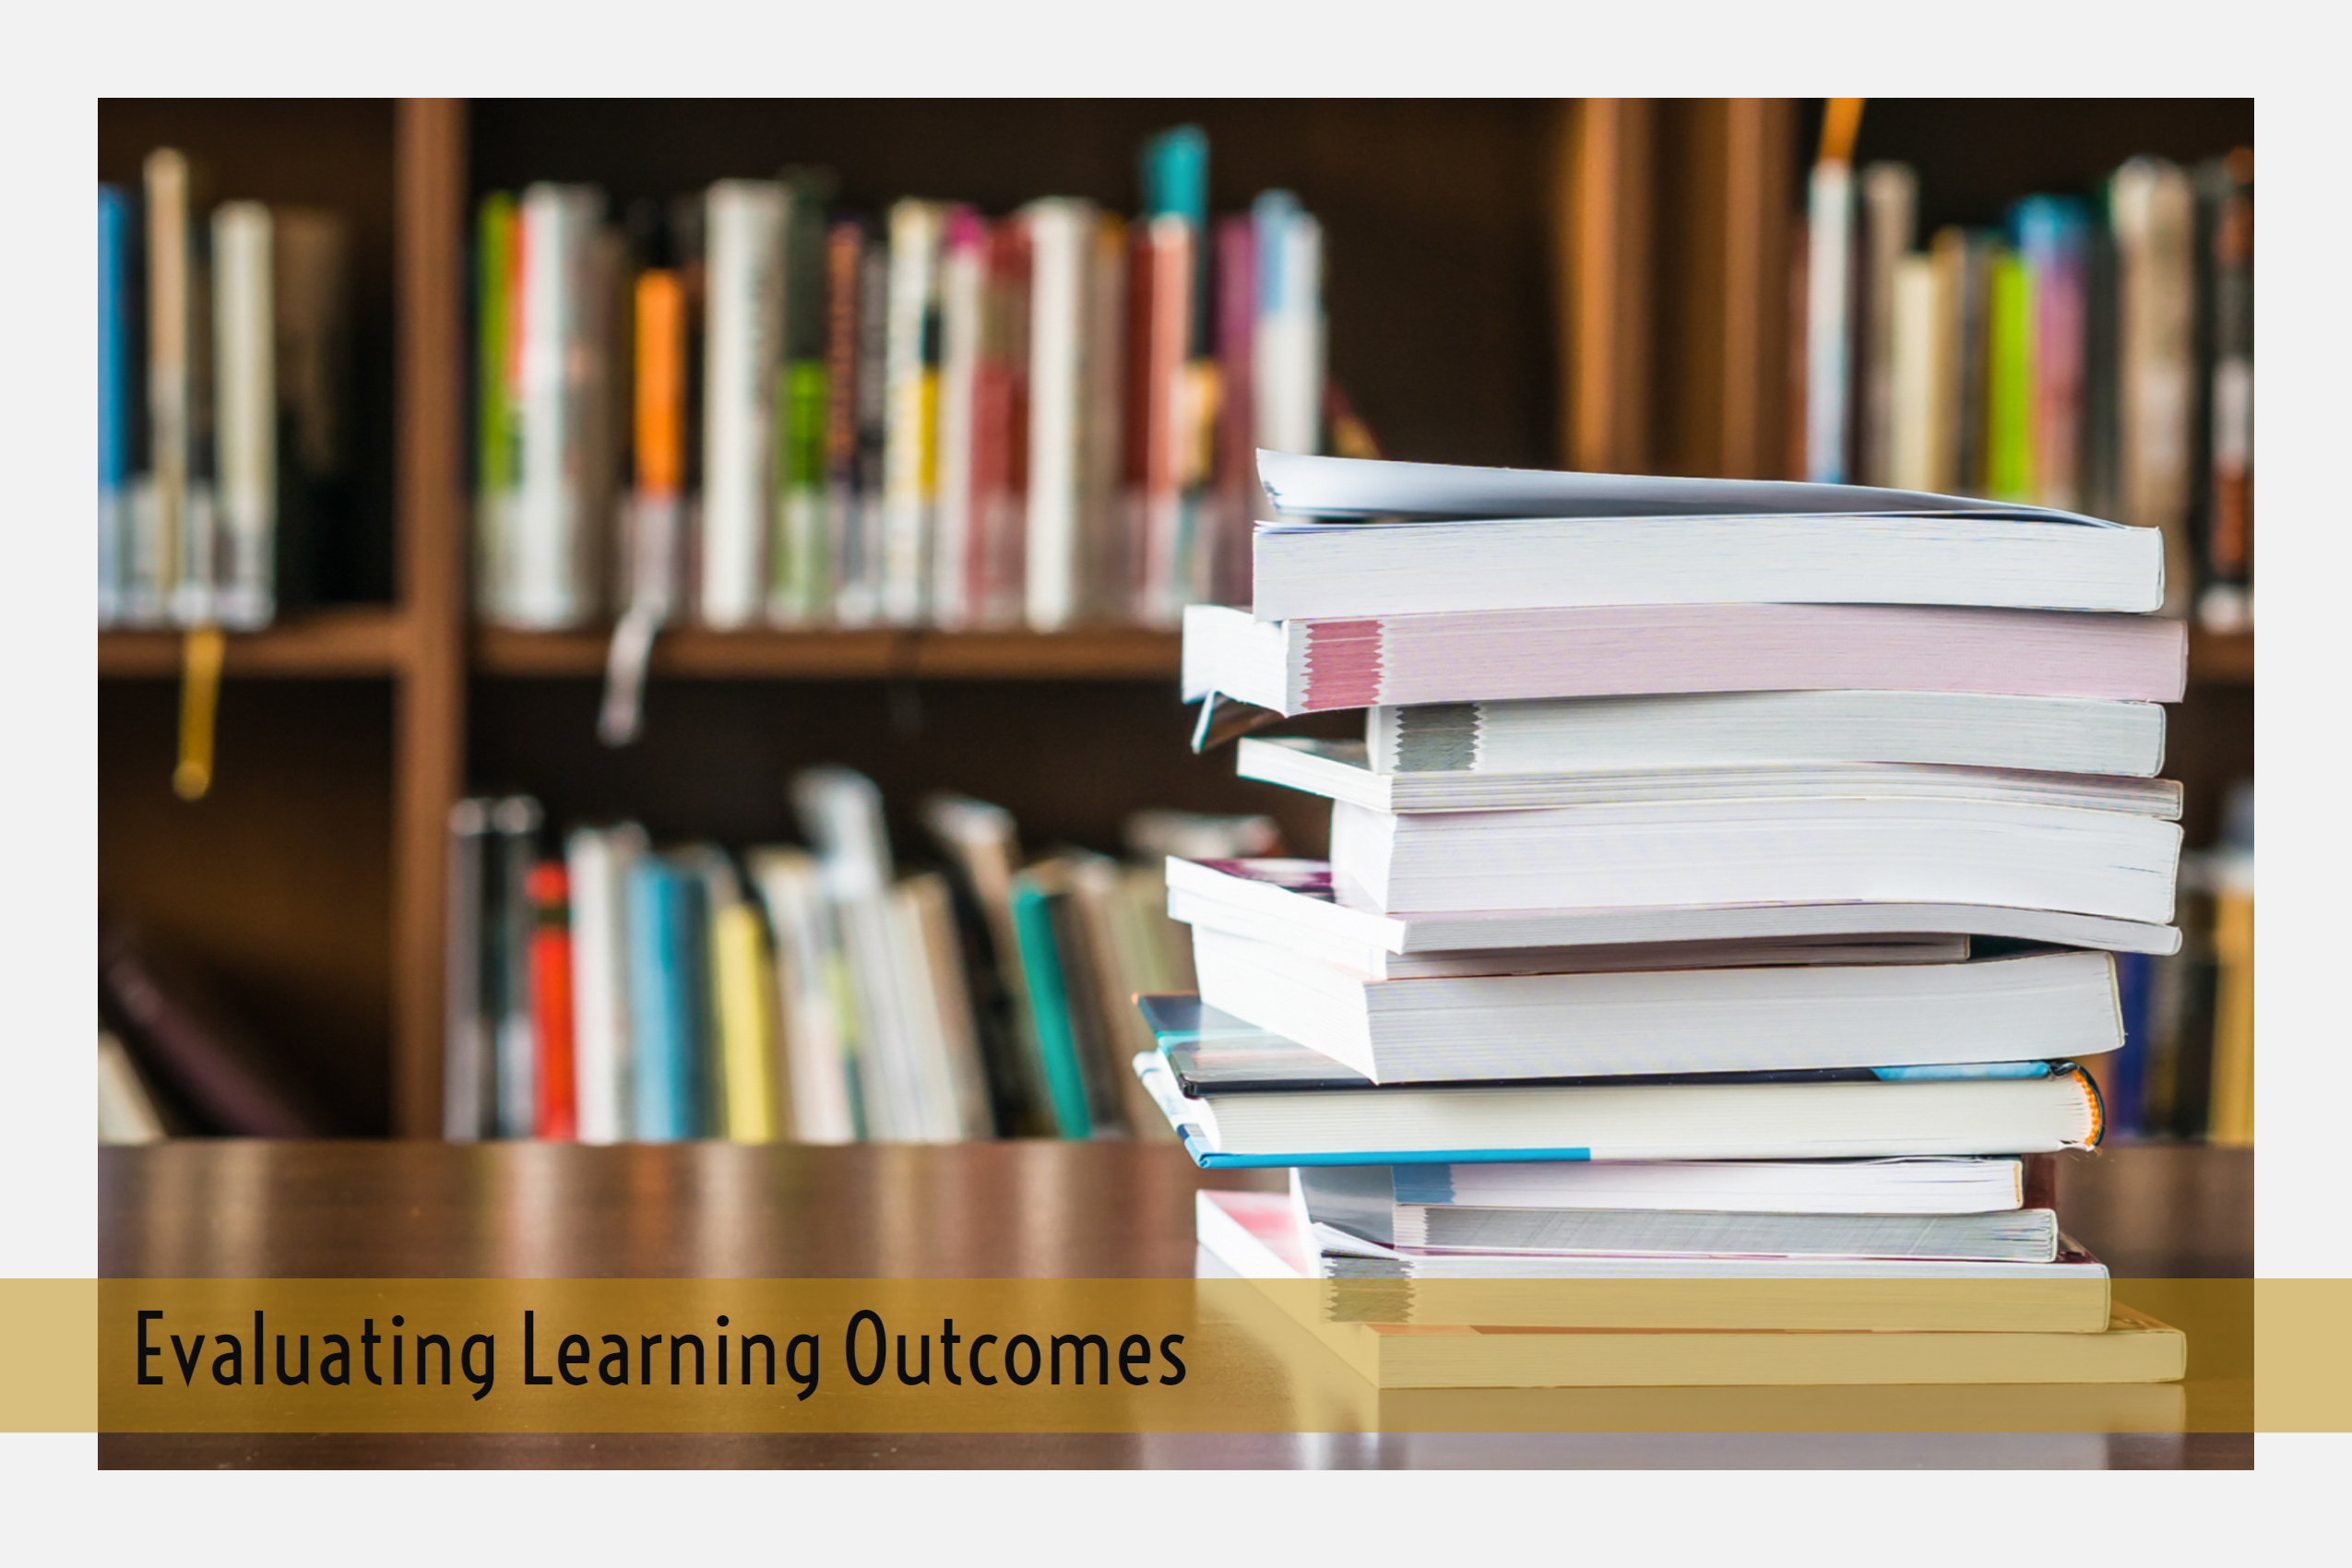 Evaluating Learning Outcomes